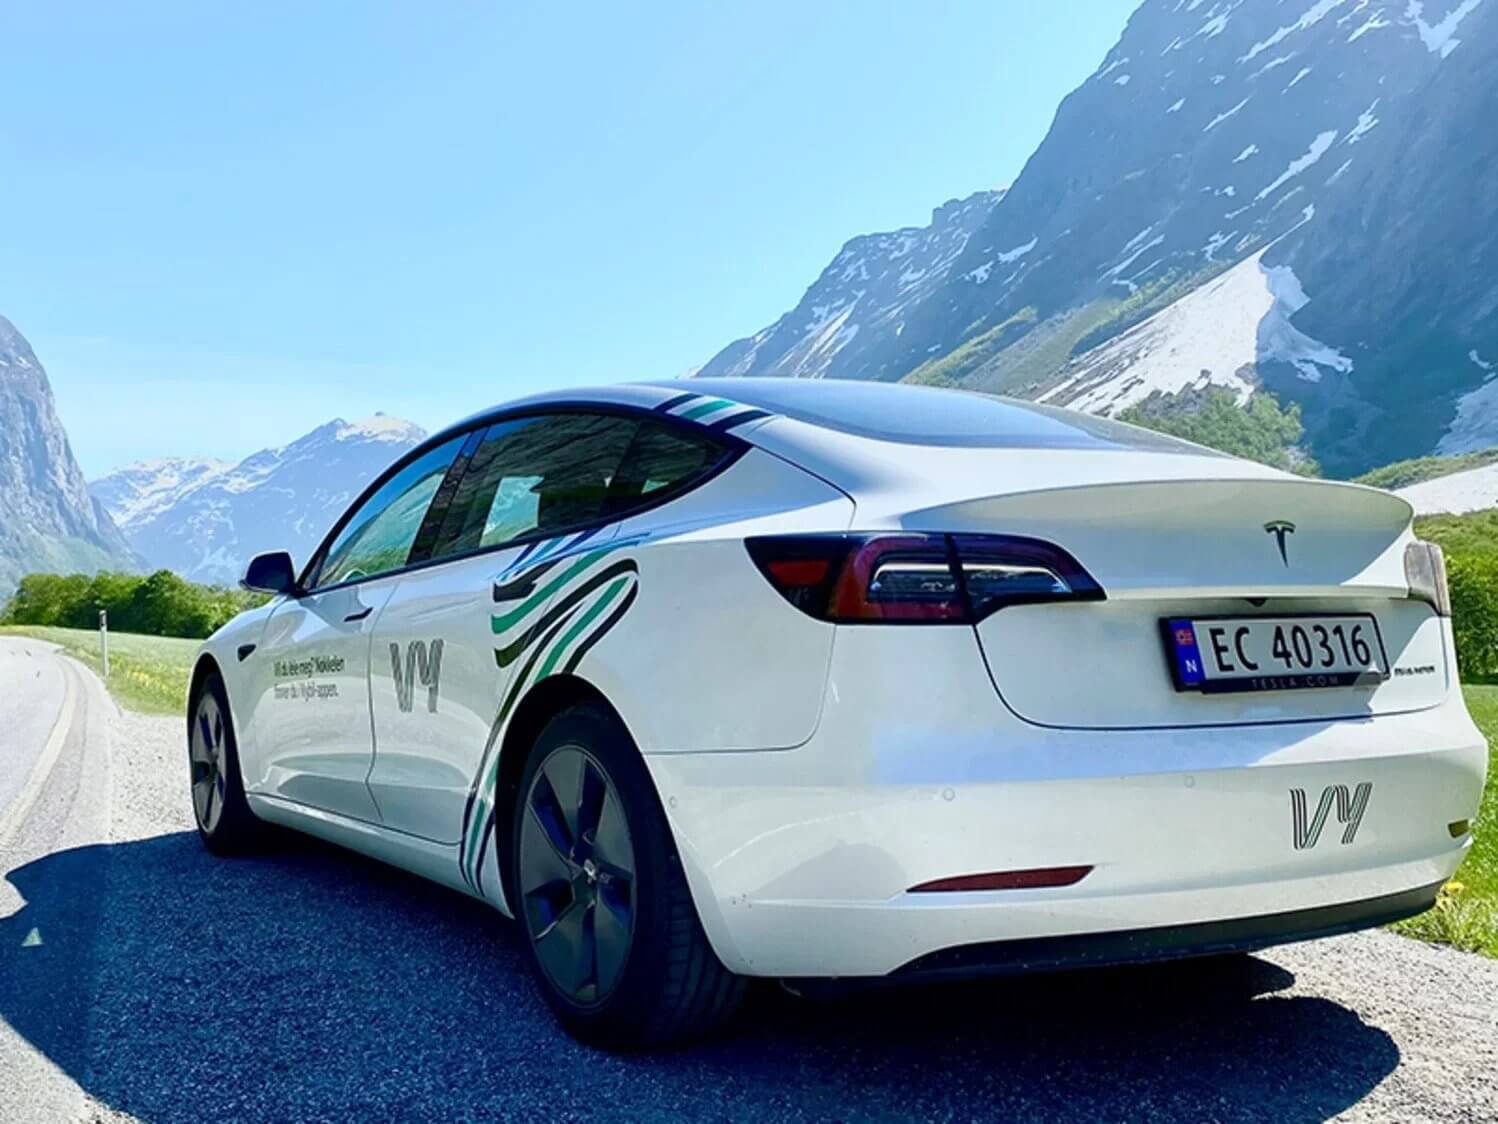 vy tesla carsharing in norway